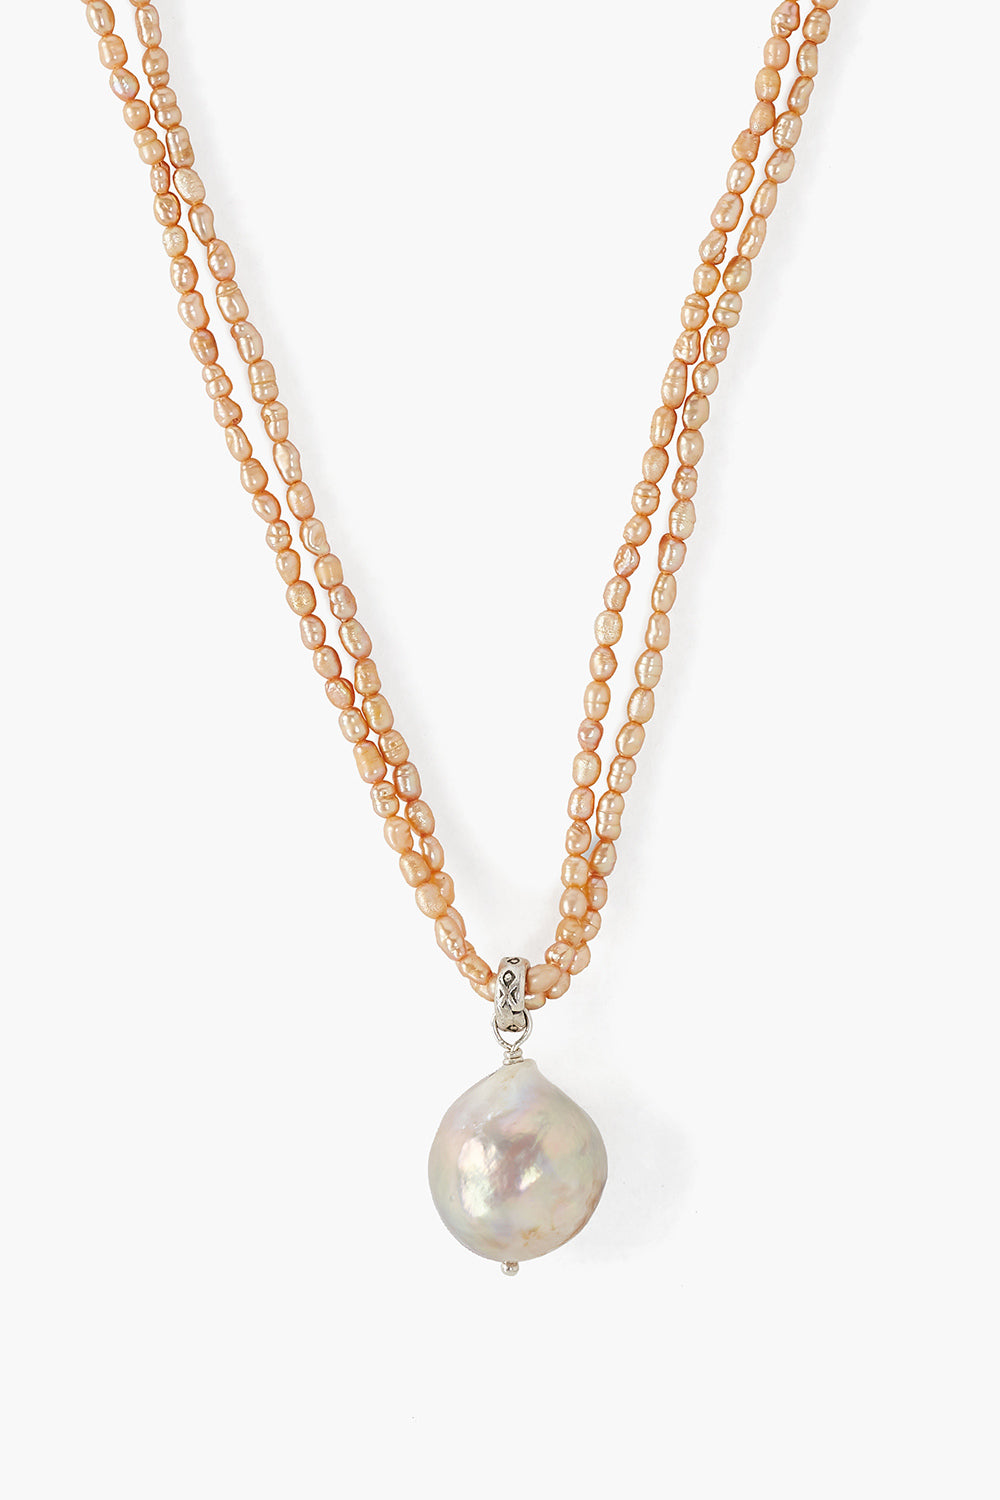 2 LAYER ADJUSTABLE PEARL CHARM NECKLACE